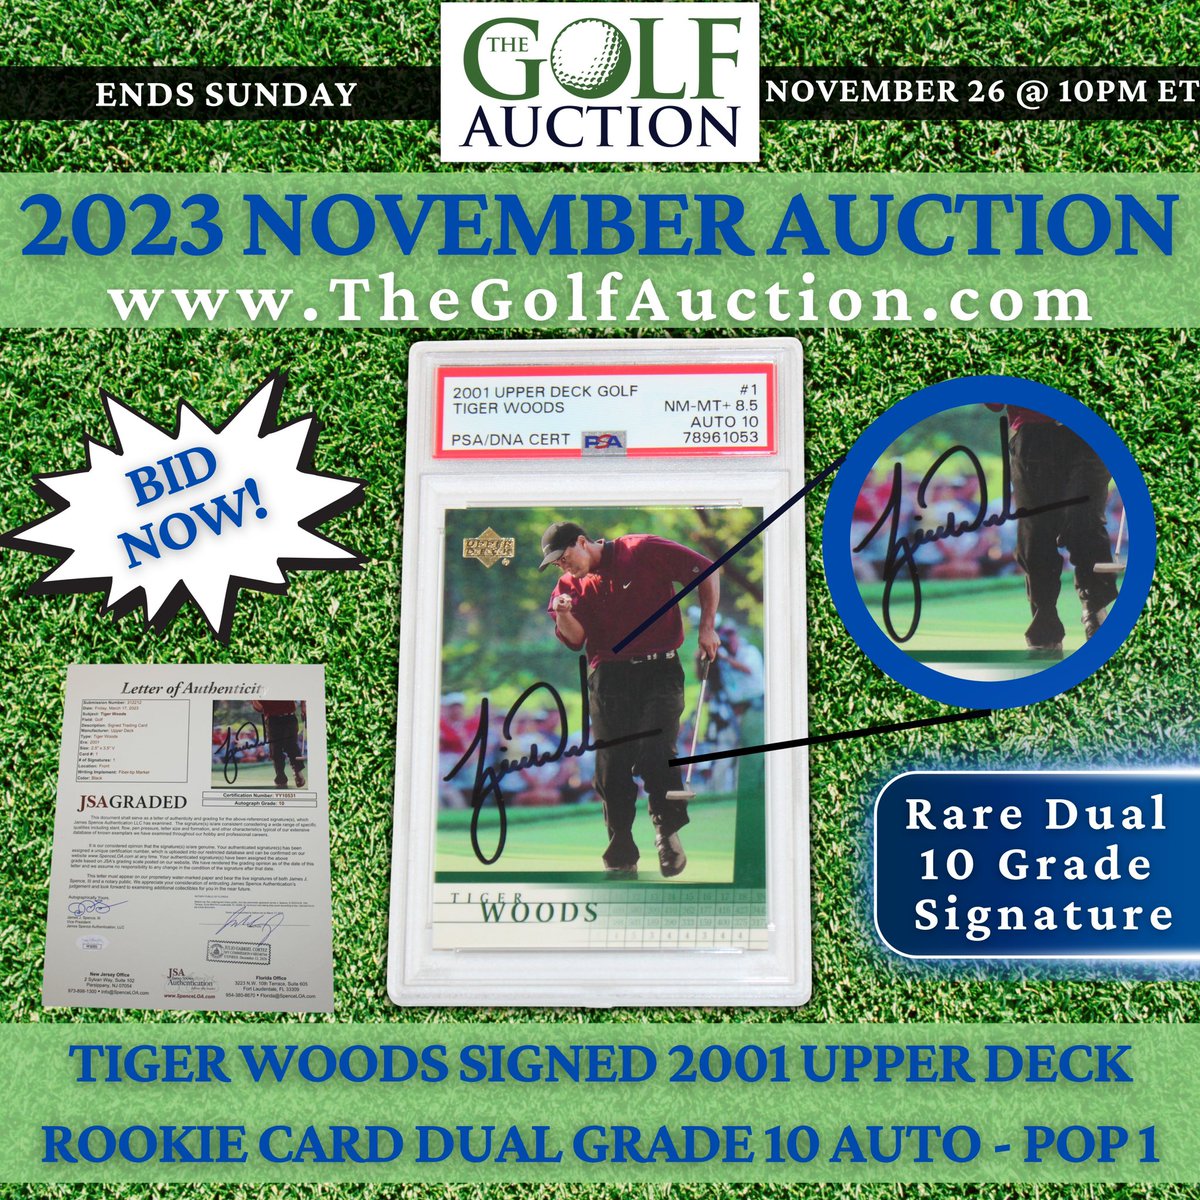 Ending November 26th 👉 Bid Now at The Golf Auction on RARE #TigerWoods signed items! ⛳️

#JSAgraded 10 AUTO Rookie Trading Card

View Auction - bit.ly/49AVAHP

#jsaauthenticated #upperdeck #thegolfauction